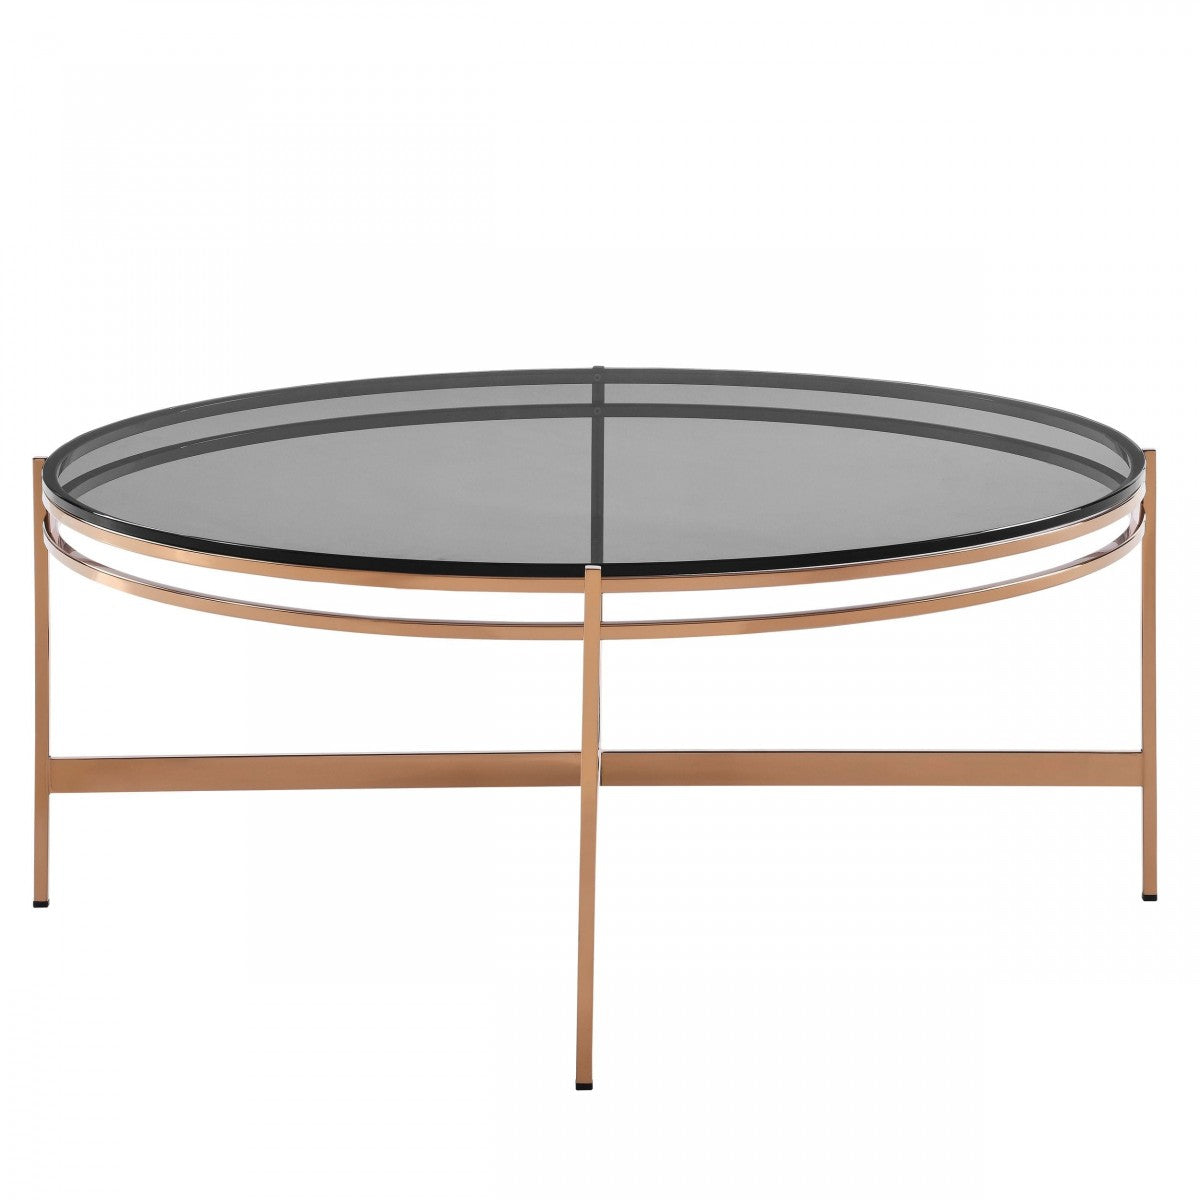 Ansley Modern Smoked Glass & Rosegold Coffee Table